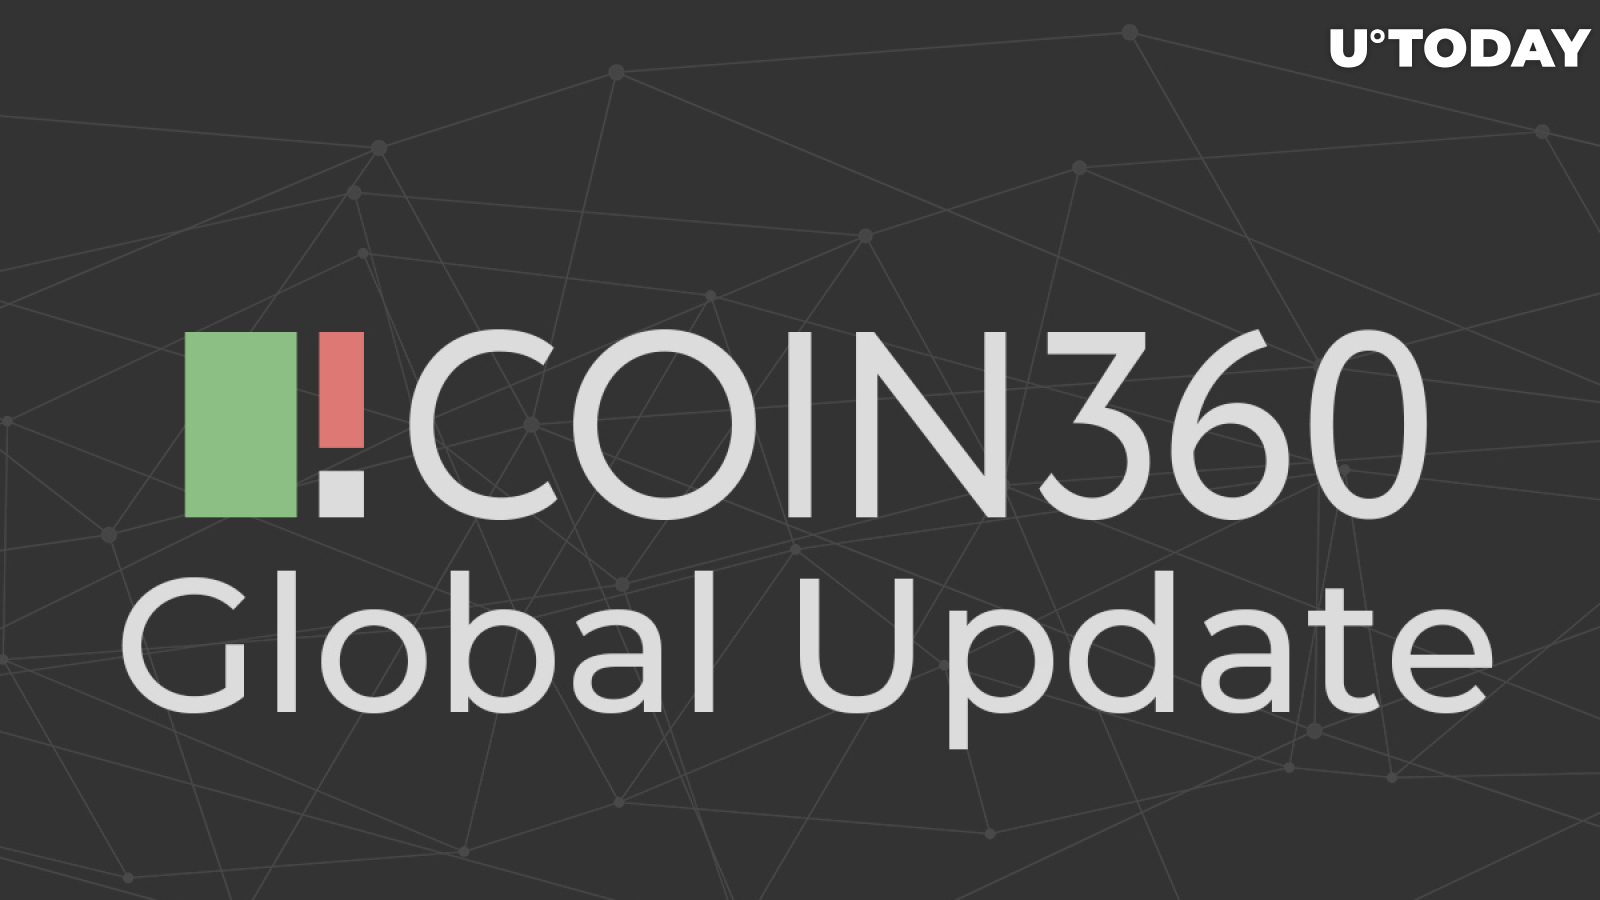 Coin360 Introduced New Features and Platform Interface in Global Update